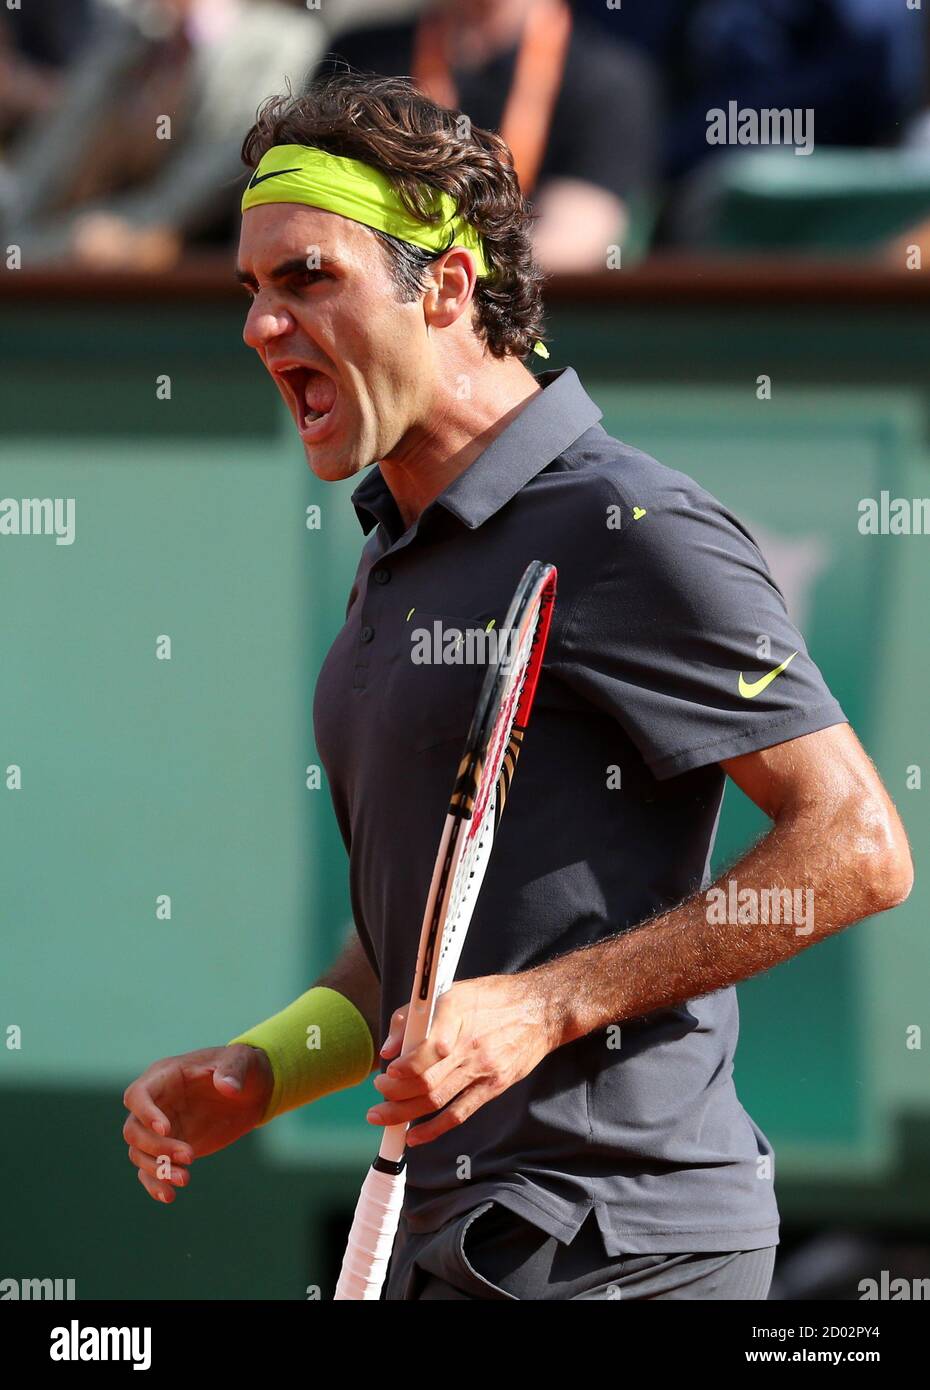 Roger Federer of Switzerland reacts during his men's singles semi-final  match against Novak Djokovic of Serbia at the French Open tennis tournament  at the Roland Garros stadium in Paris June 8, 2012.